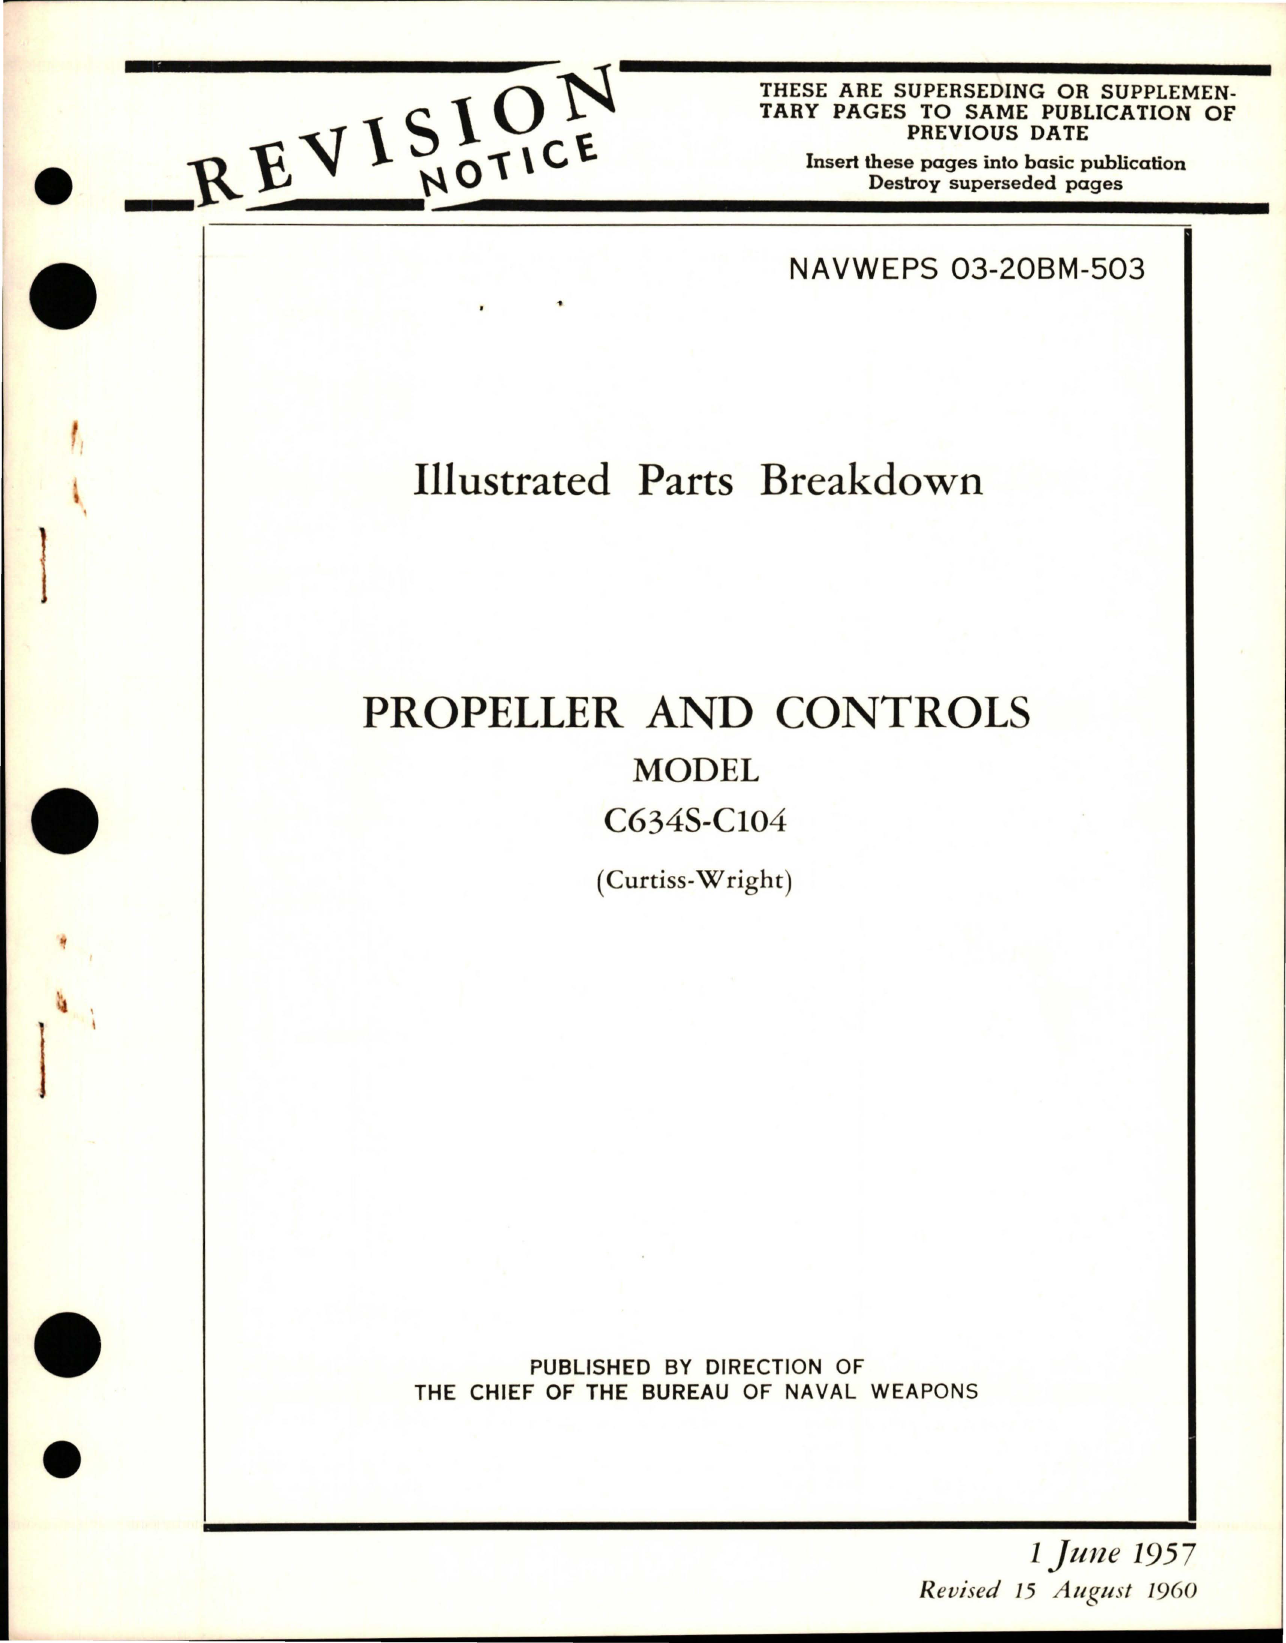 Sample page 1 from AirCorps Library document: Illustrated Parts Breakdown for Propeller and Controls - Model C634S-C104 